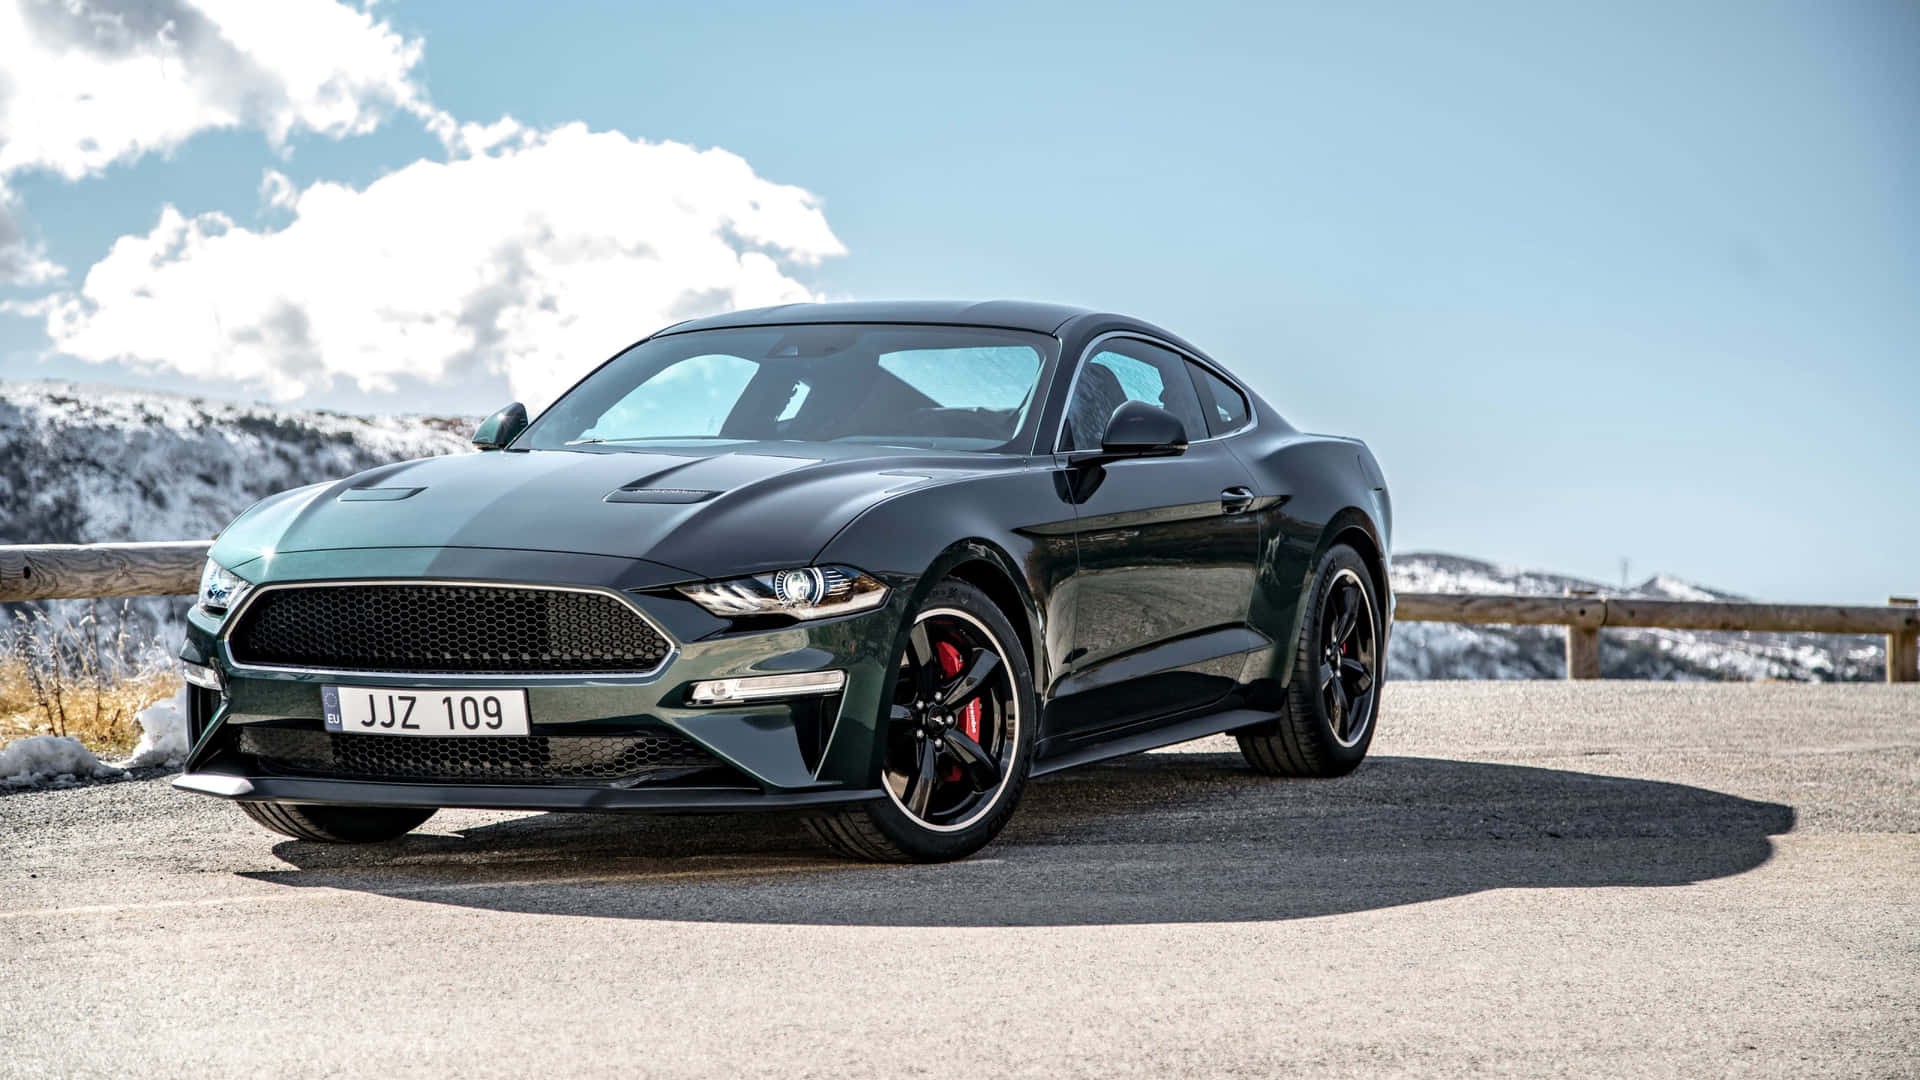 Ford Mustang Bullitt: A Classic and Powerful Muscle Car Wallpaper